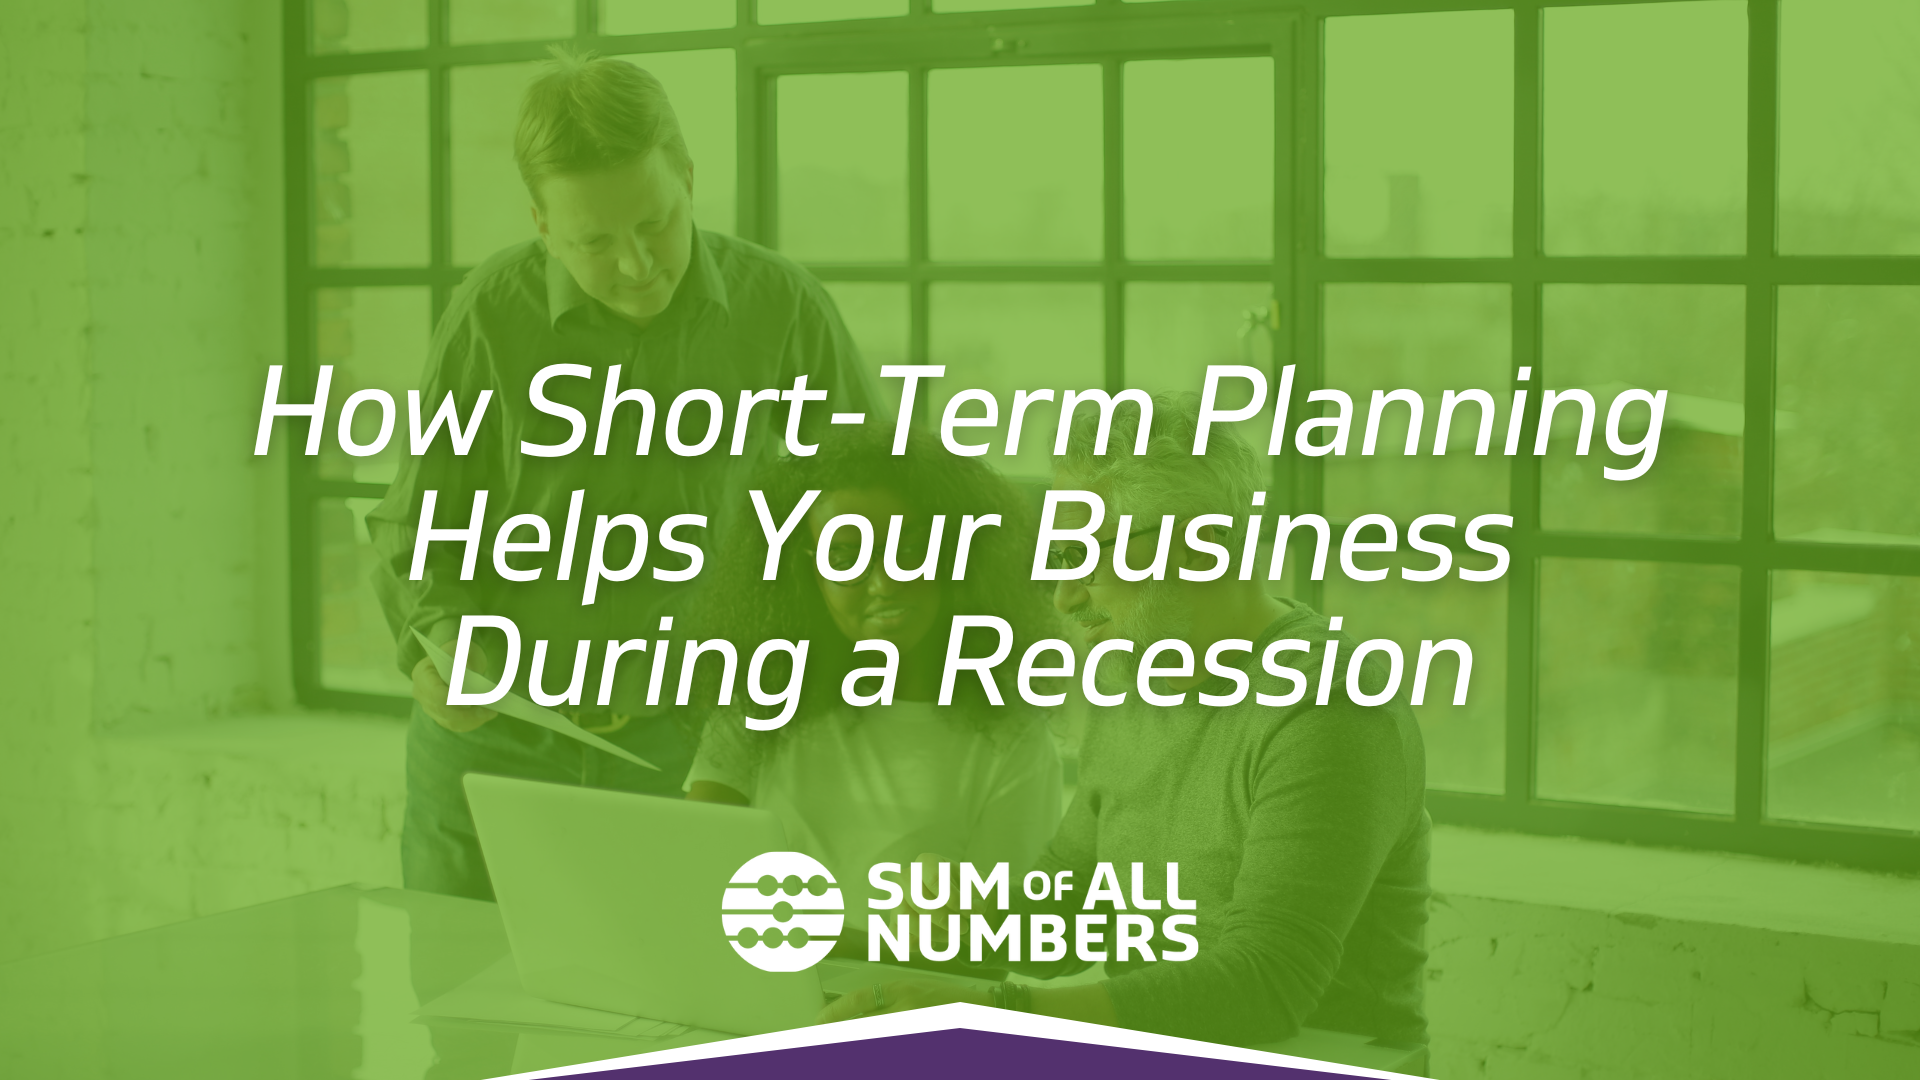 How Short-Term Planning Helps Your Business During a Recession